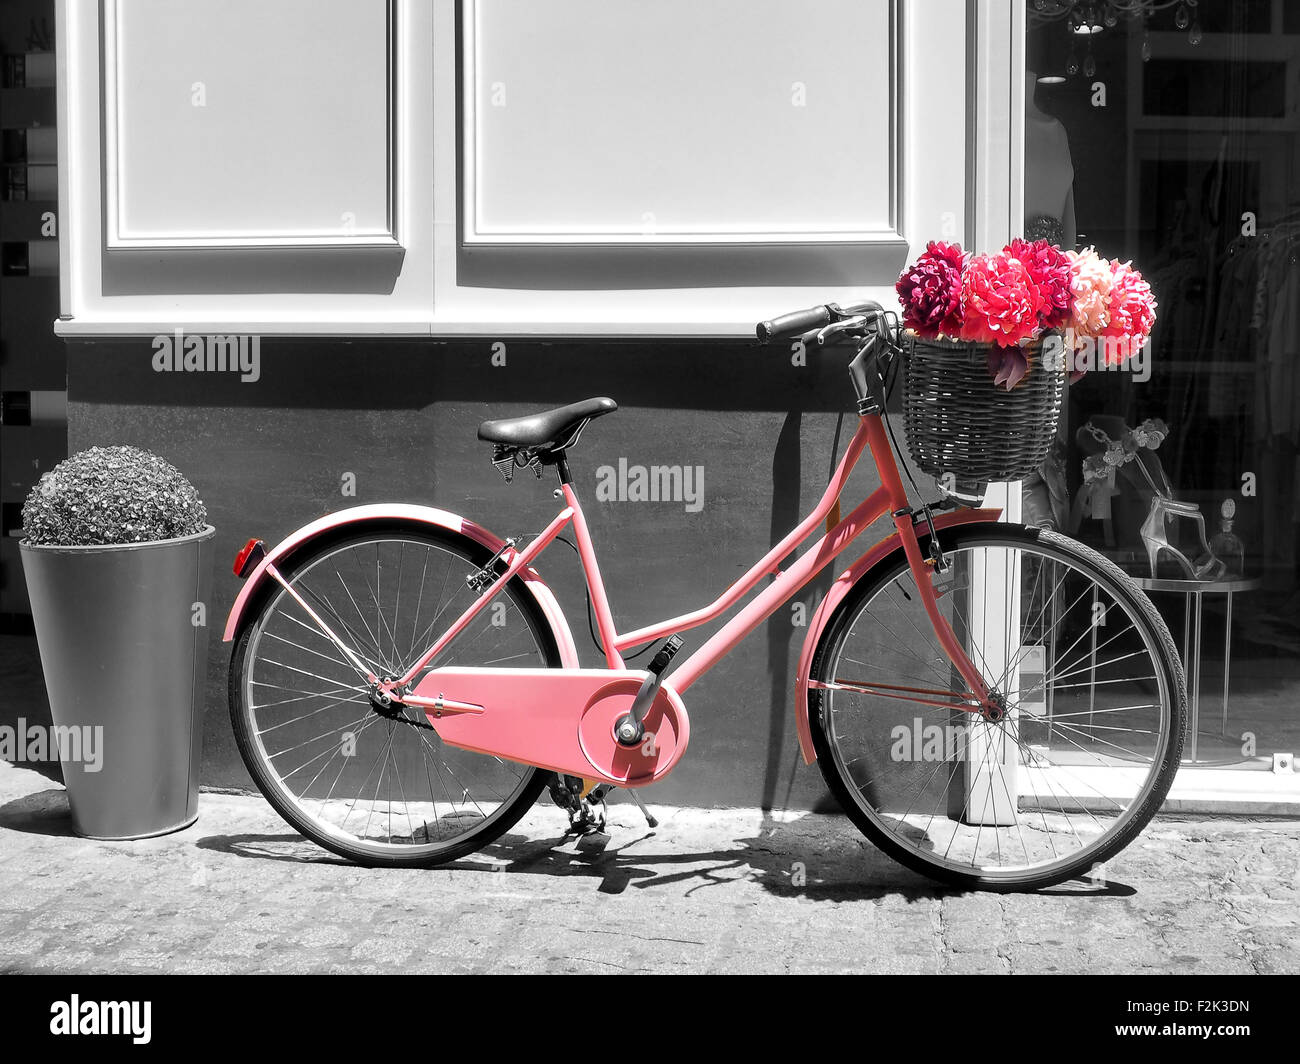 This vintage pink girls bicycle has beautiful pink flowers in a basket on the front of the bike Stock Photo